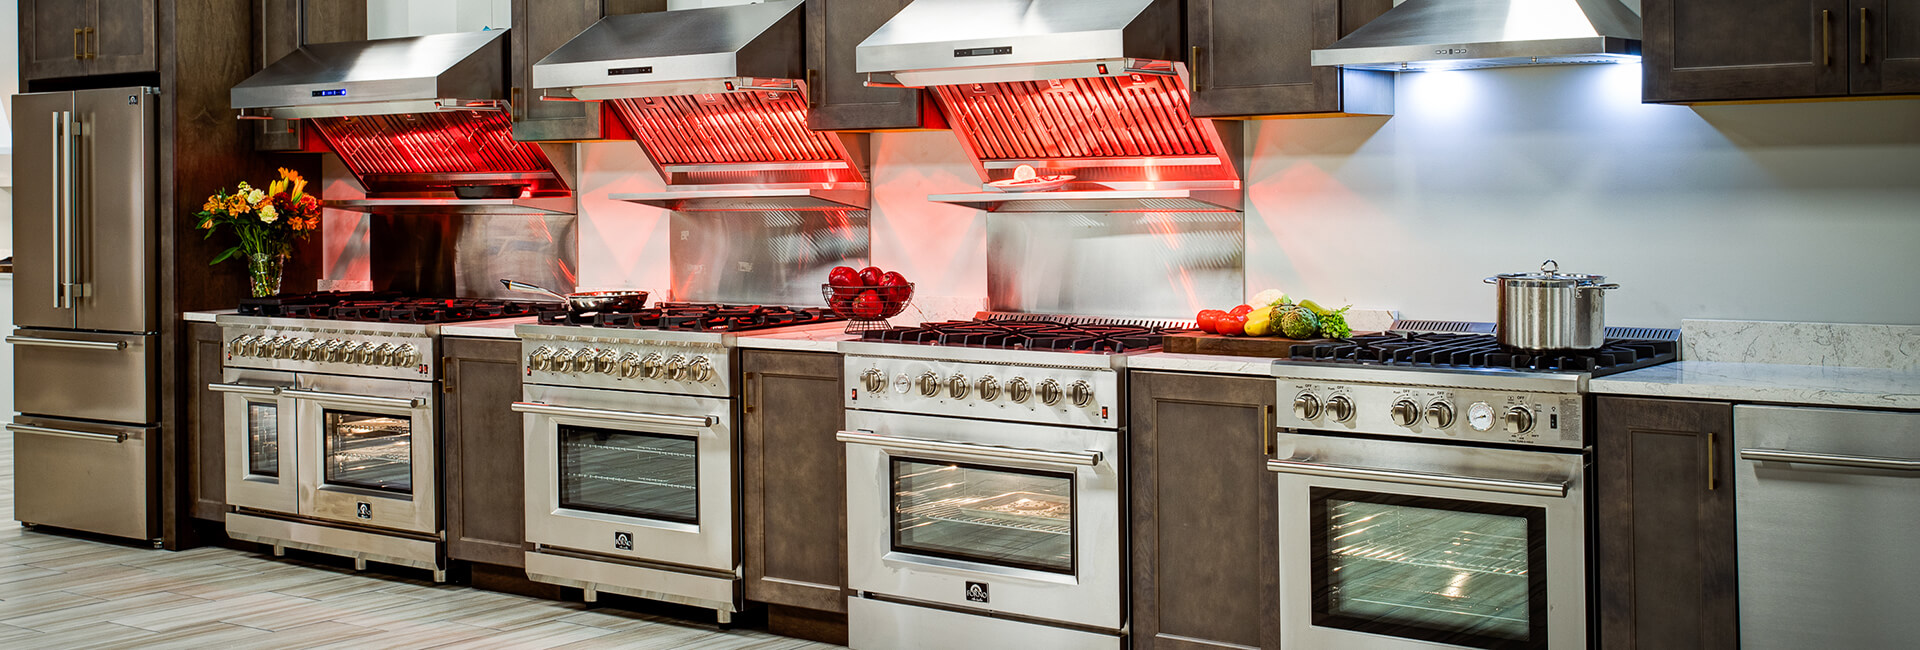 Forno Ranges with Hoods